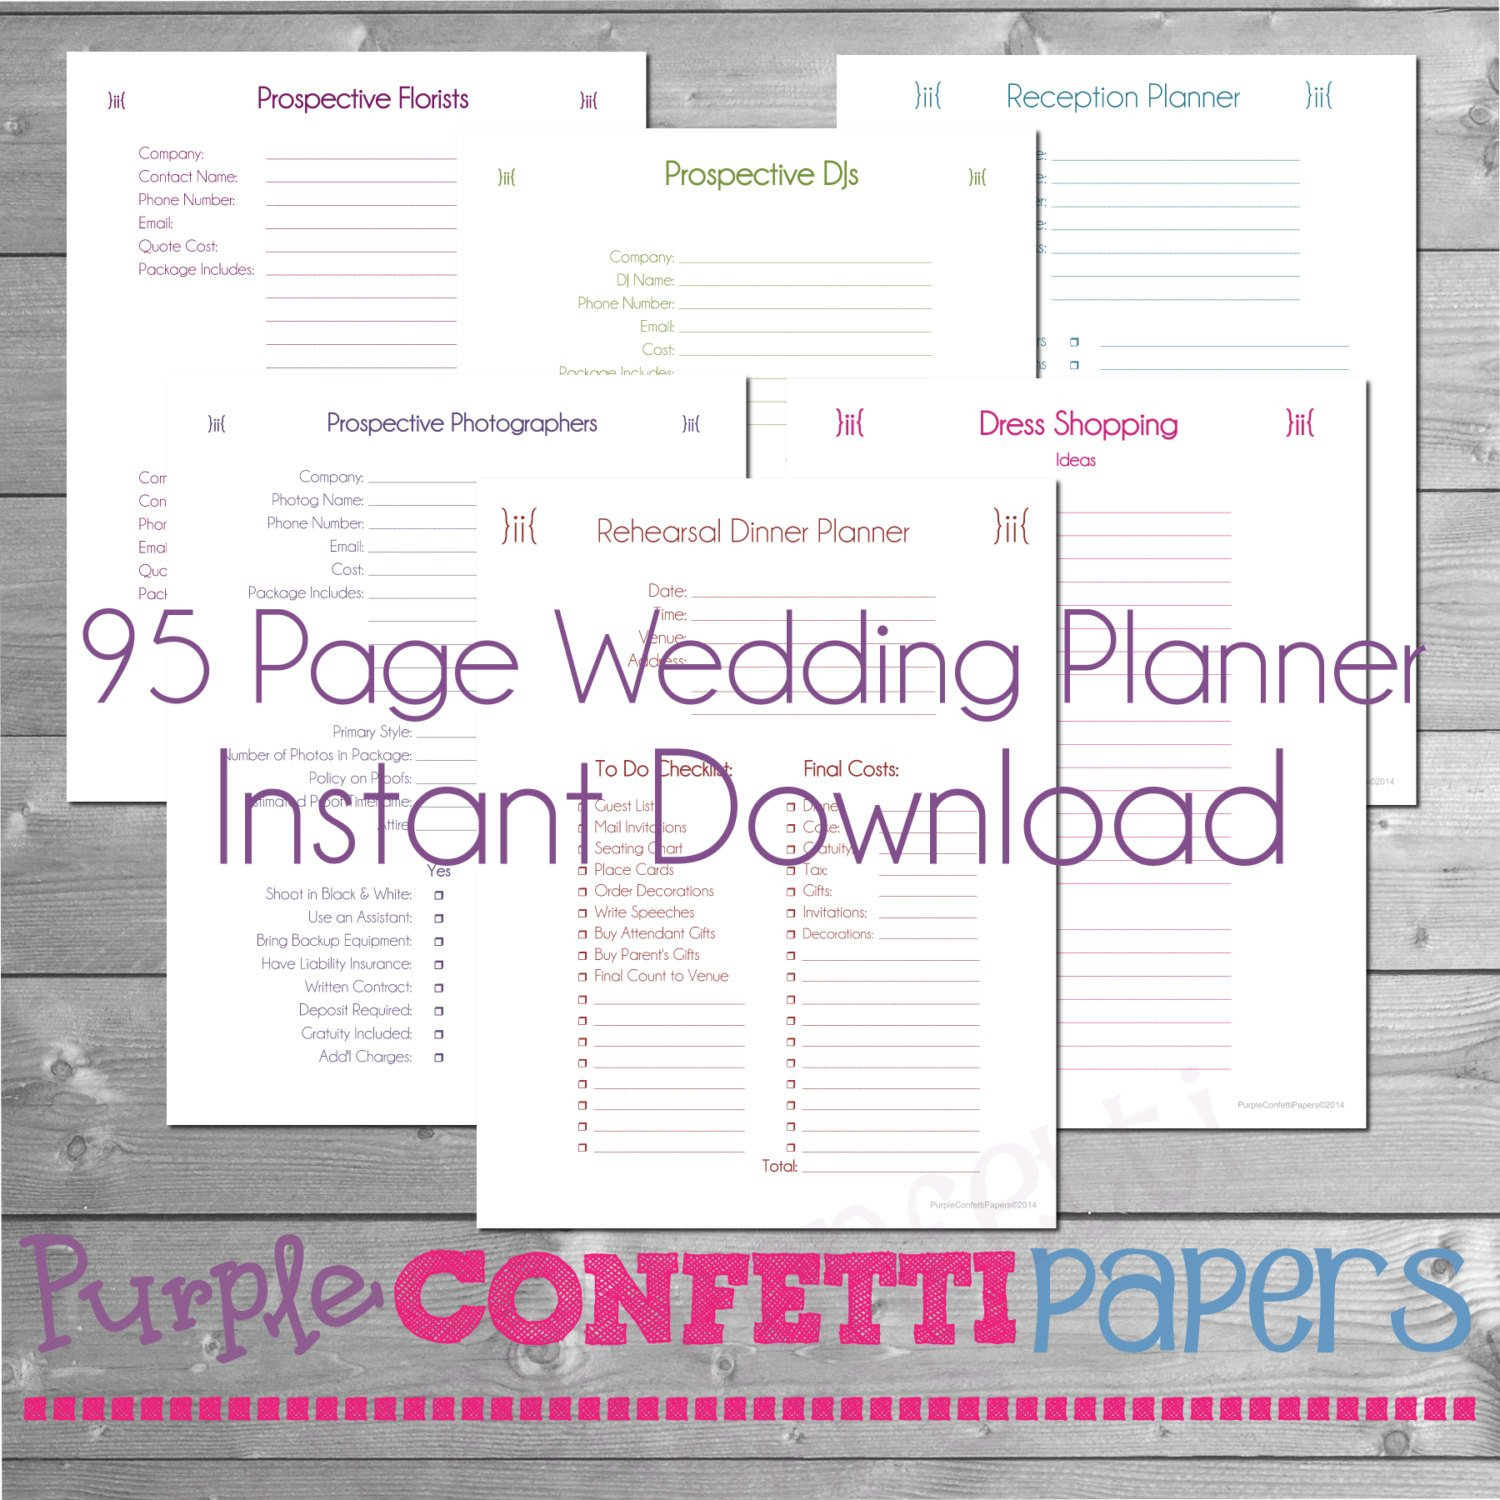 Printable Wedding Planner 95 Pages Instant Download Kit | Etsy - Free Printable Wedding Planner Pdf